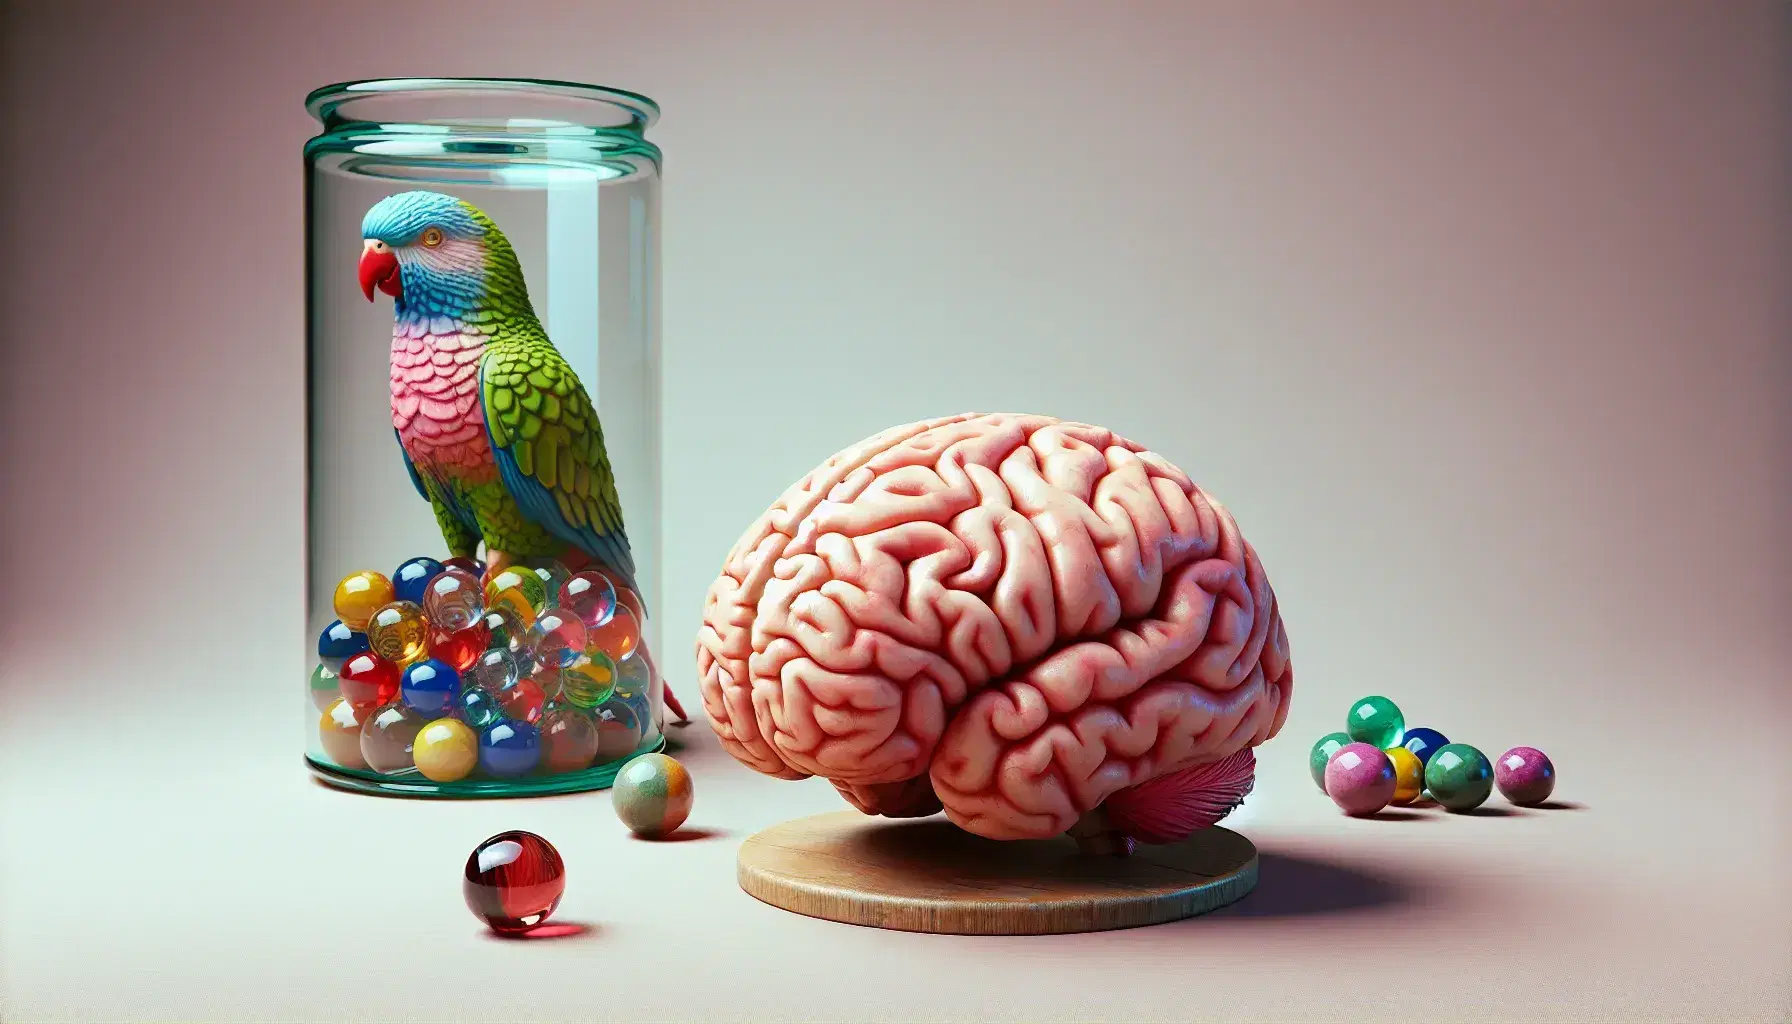 Detailed model of human brain with sulci and convolutions on neutral background, jar of colorful marbles and green parrot on perch.